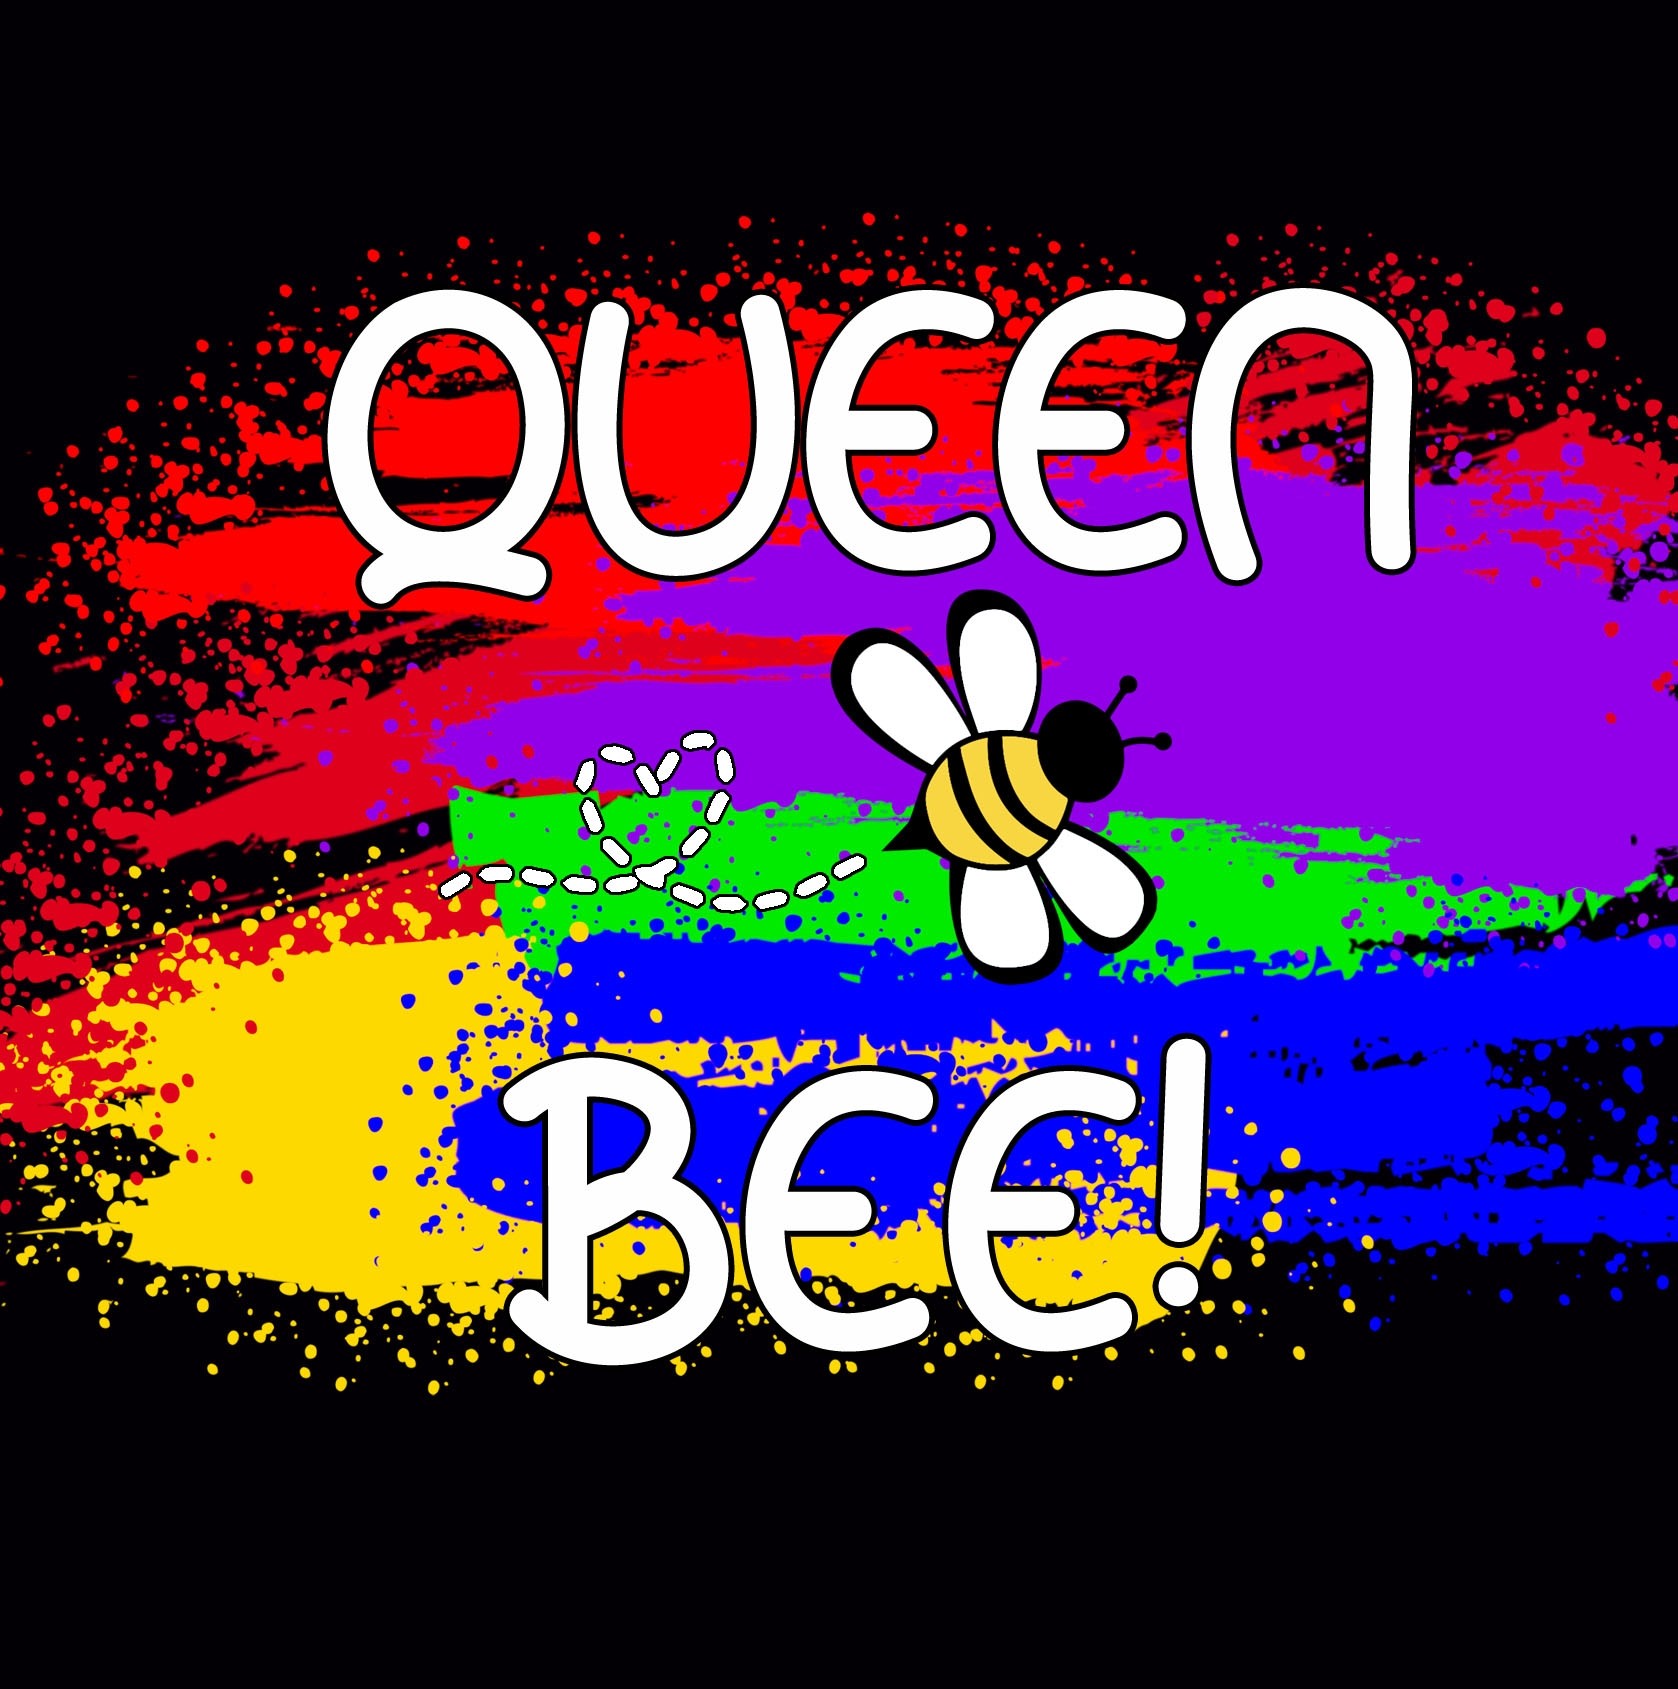 Inspirational Quote Pride Greeting Card - Queen Bee